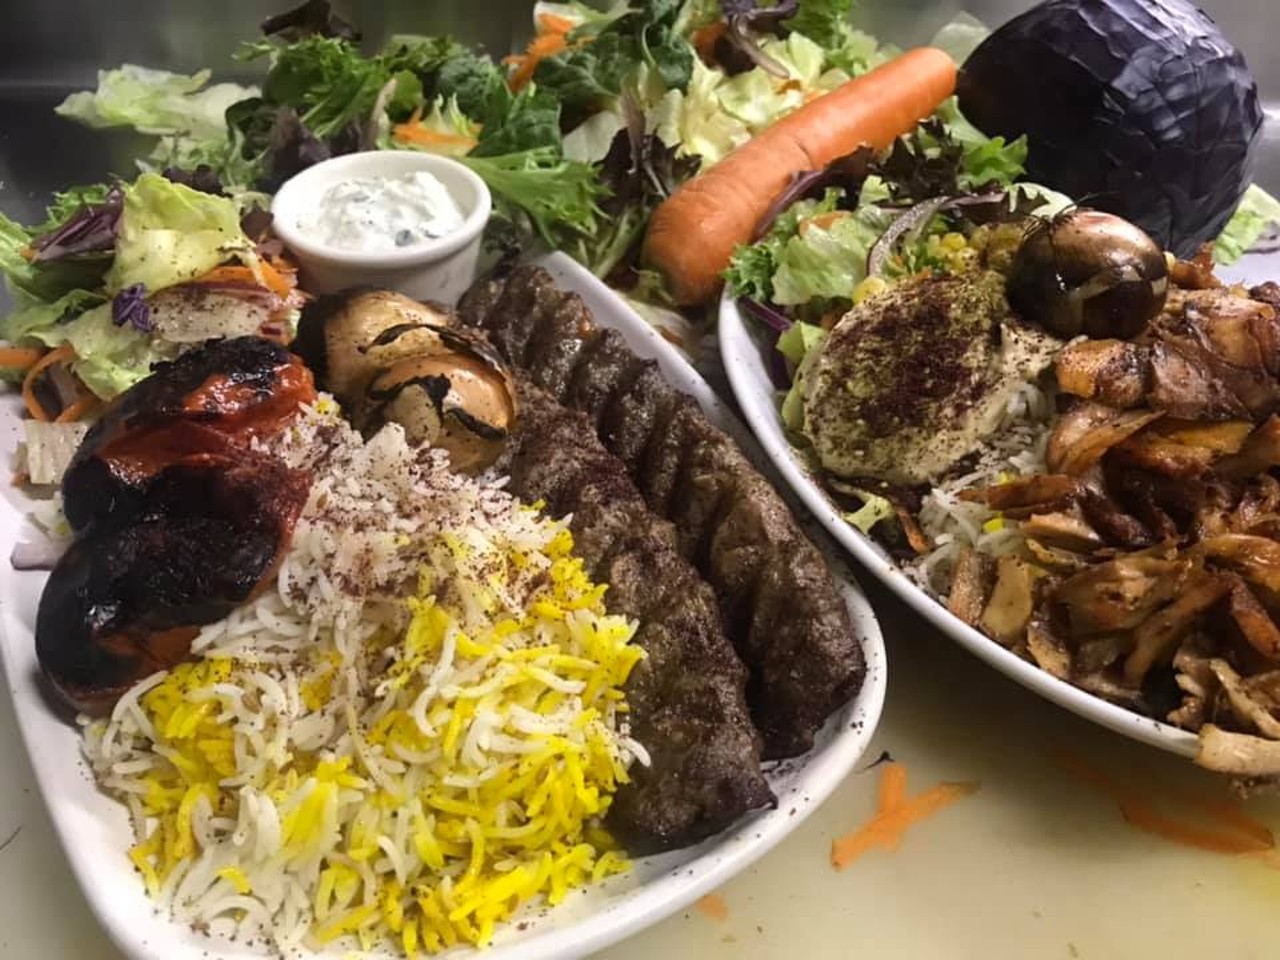 Ohio Kabob Grill
3359 West 117th St., Cleveland
"This is a hidden gem with great food, made fresh and right to order. The owners were so nice and accommodating. As was the kind gentleman that greets you at the entrance. Check it out and treat yourself to some wonderful Afghan cuisine,&#148; Robert T. on Yelp
Photo via Ohio Kabob Grill/Facebook